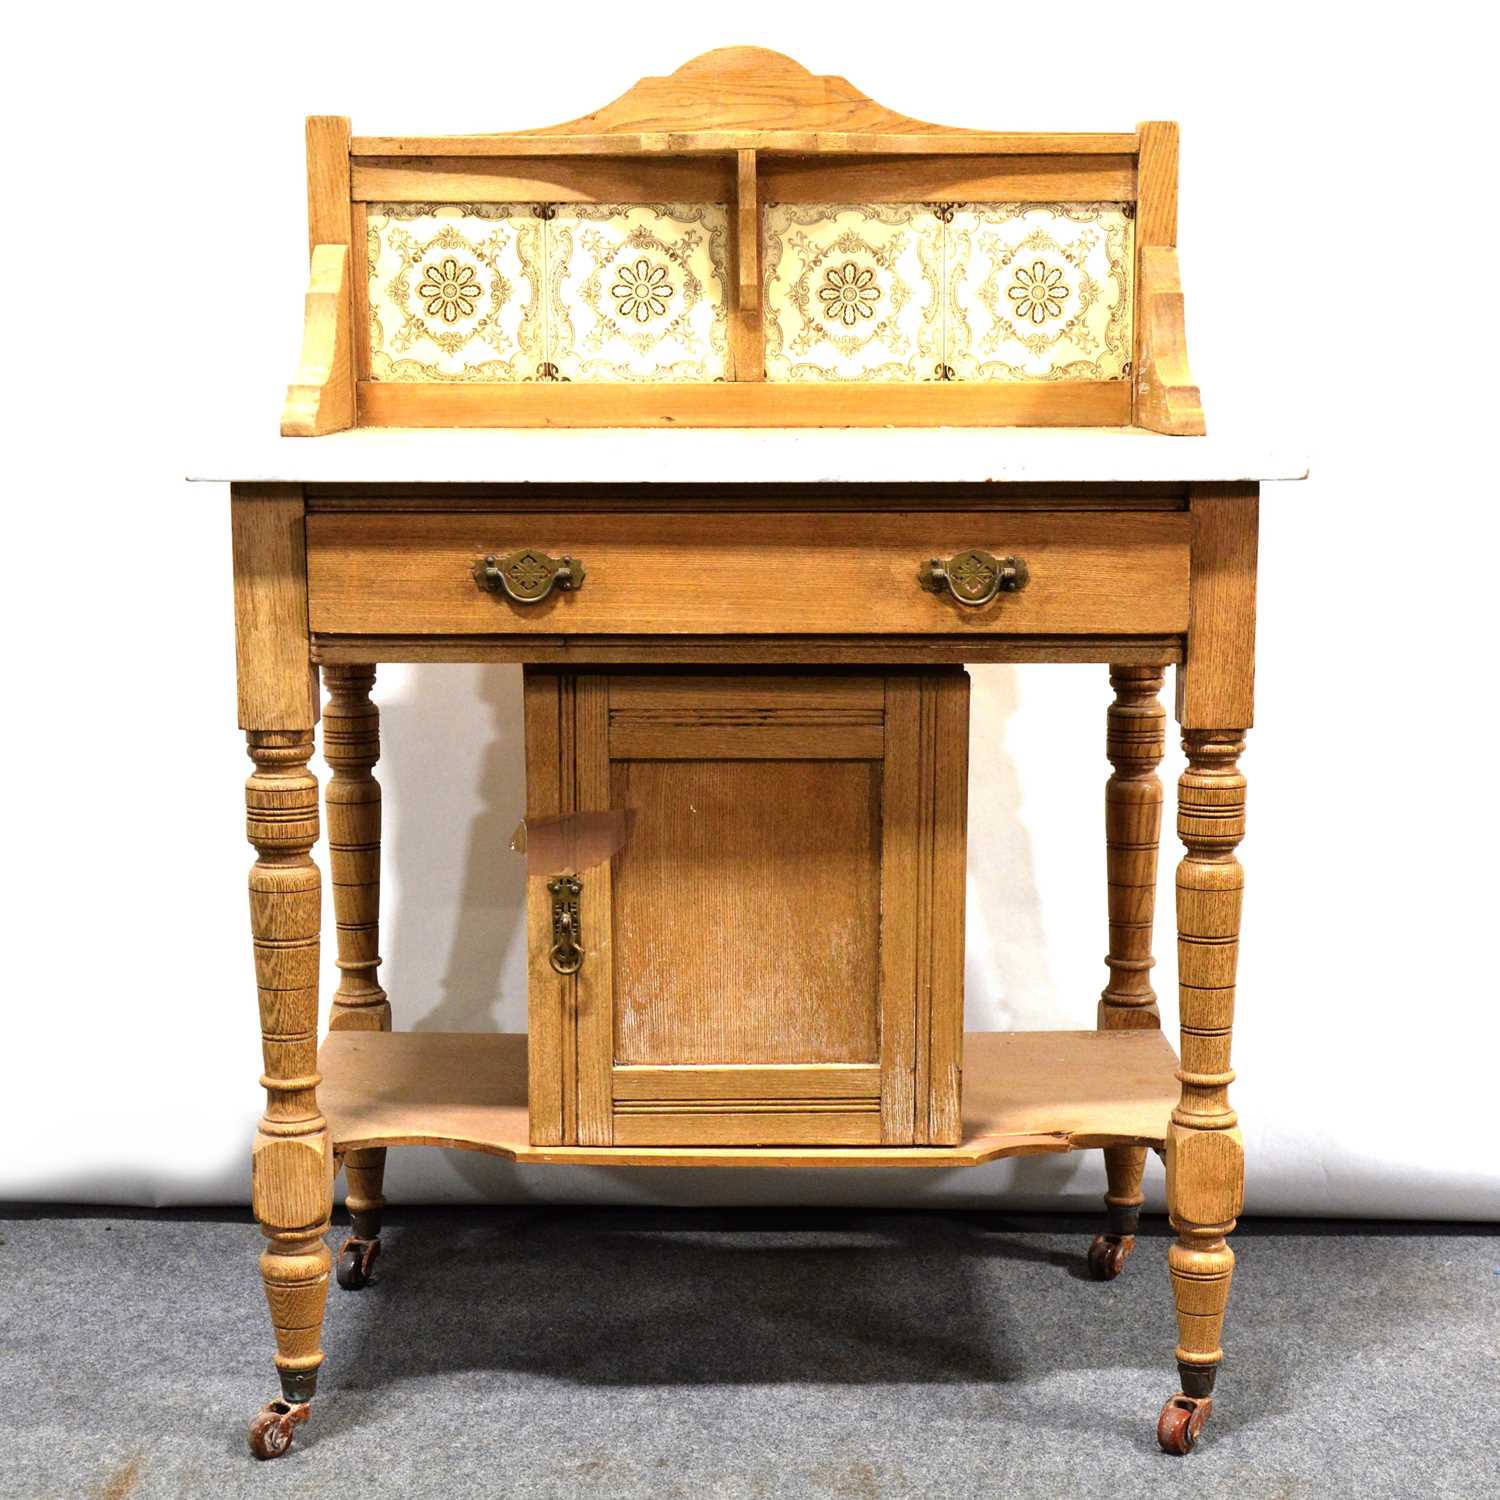 Victorian oak marble-top washstand with tile back